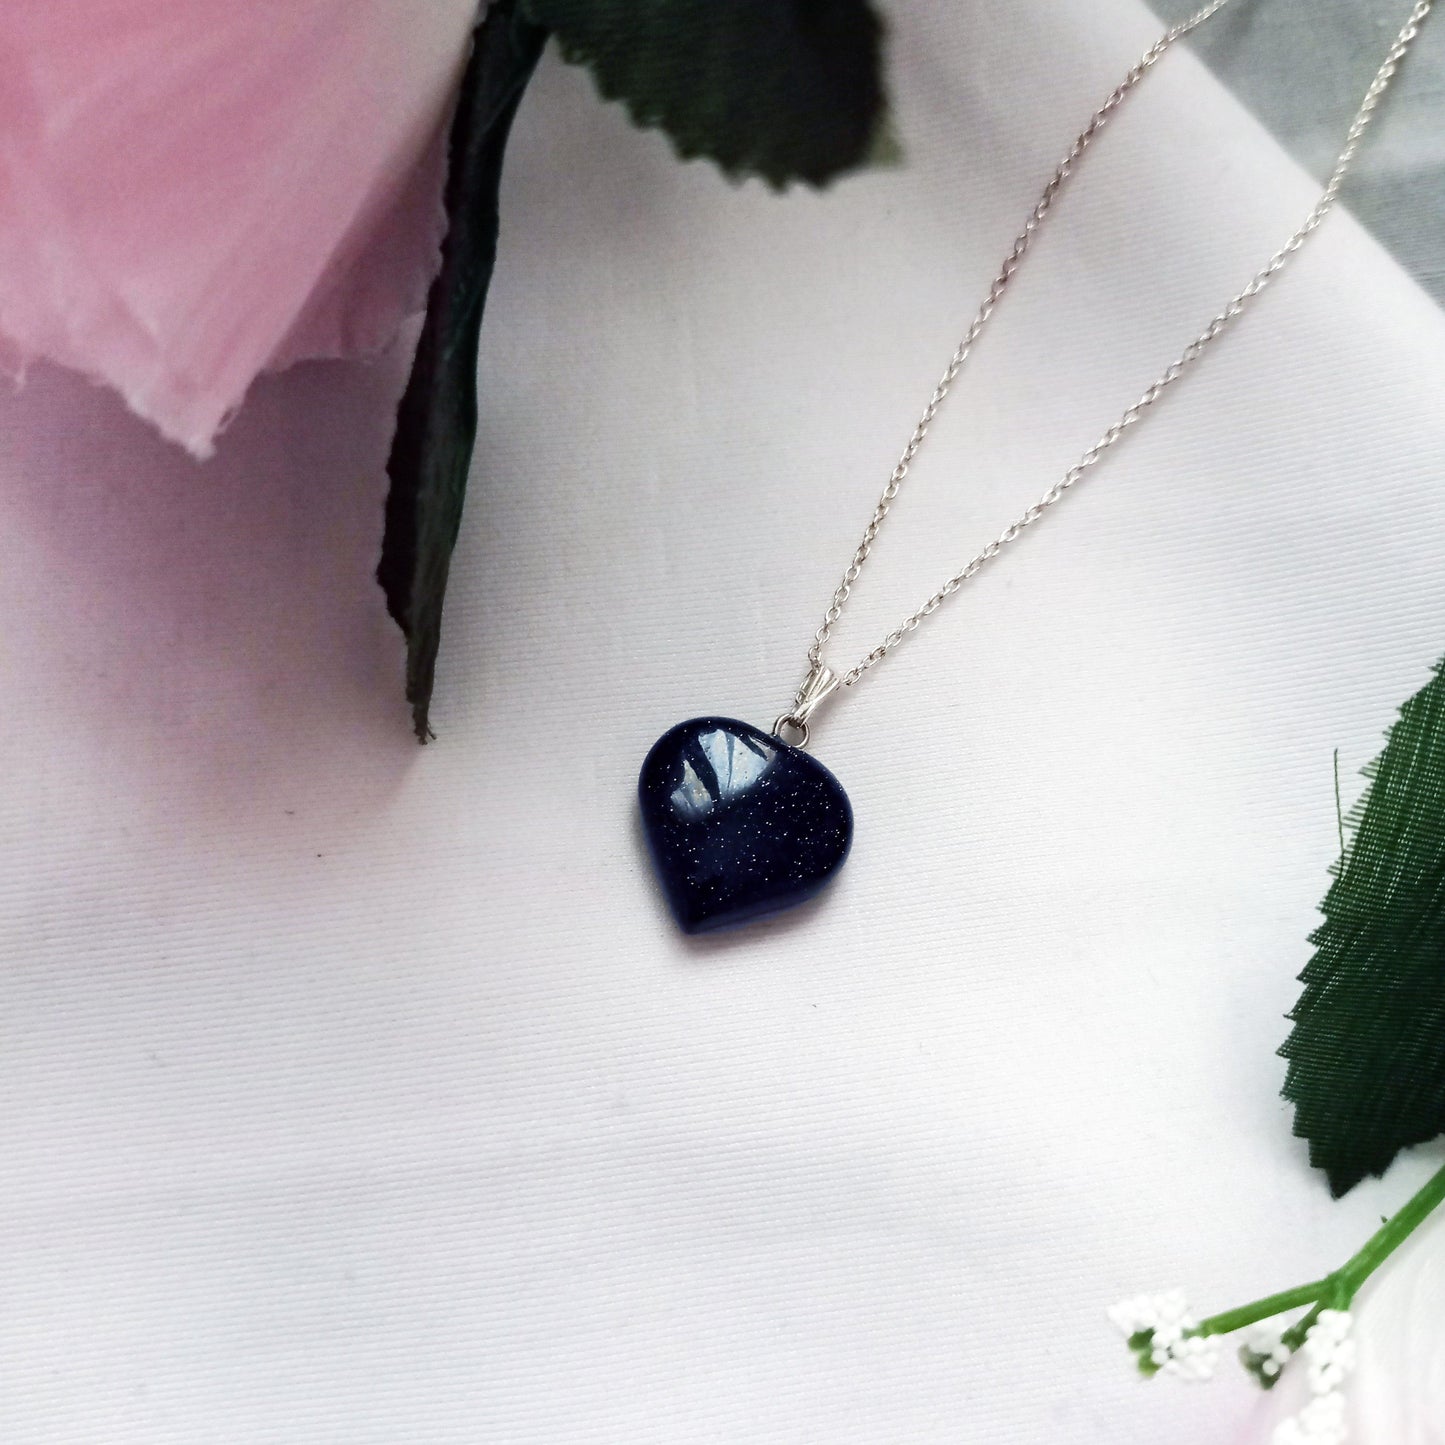 Blue Goldstone Sterling Silver Necklace, Heart Pendant Necklace, Gemstone Necklace, Sterling Silver Necklace | by nlanlaVictory-1